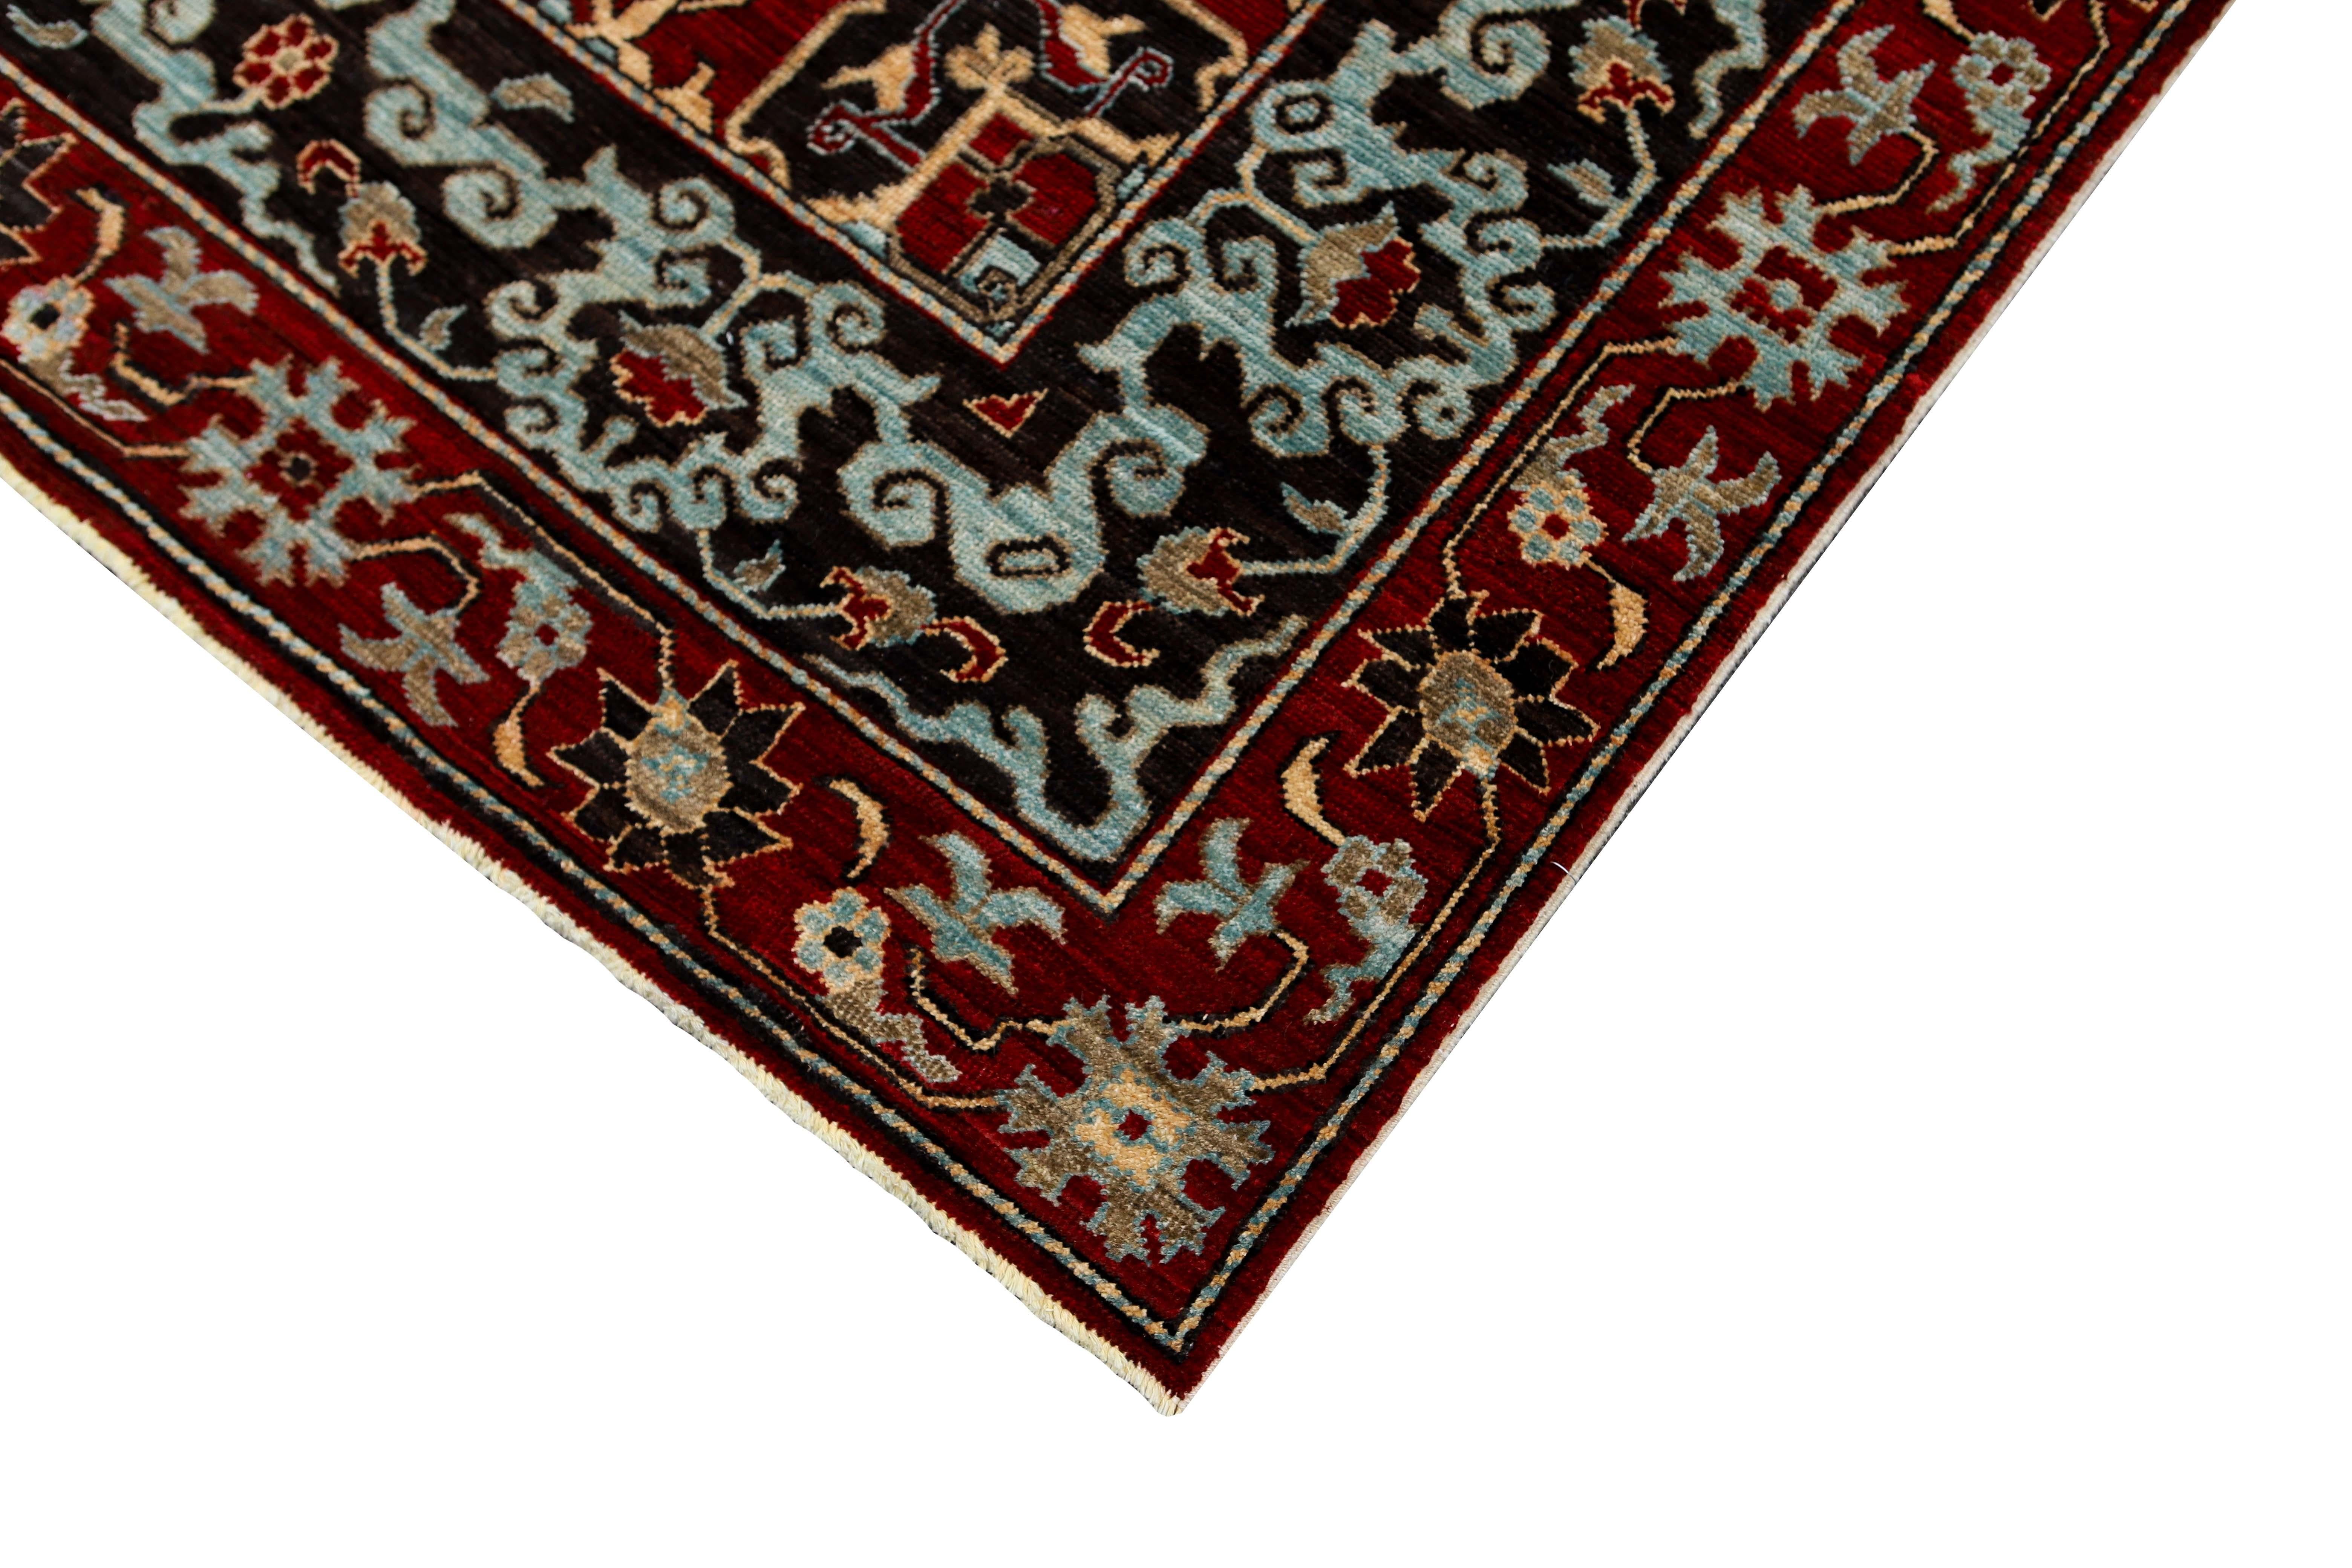 Red Afghan traditional designed 10 x 14 rug.
Hand knotted with hand-spun wool, woven in Afghanistan. This beautifully designed rug will be sure to stand out in any room.
Made of 100% wool.
Yarn-dyed for vibrant, lasting color.